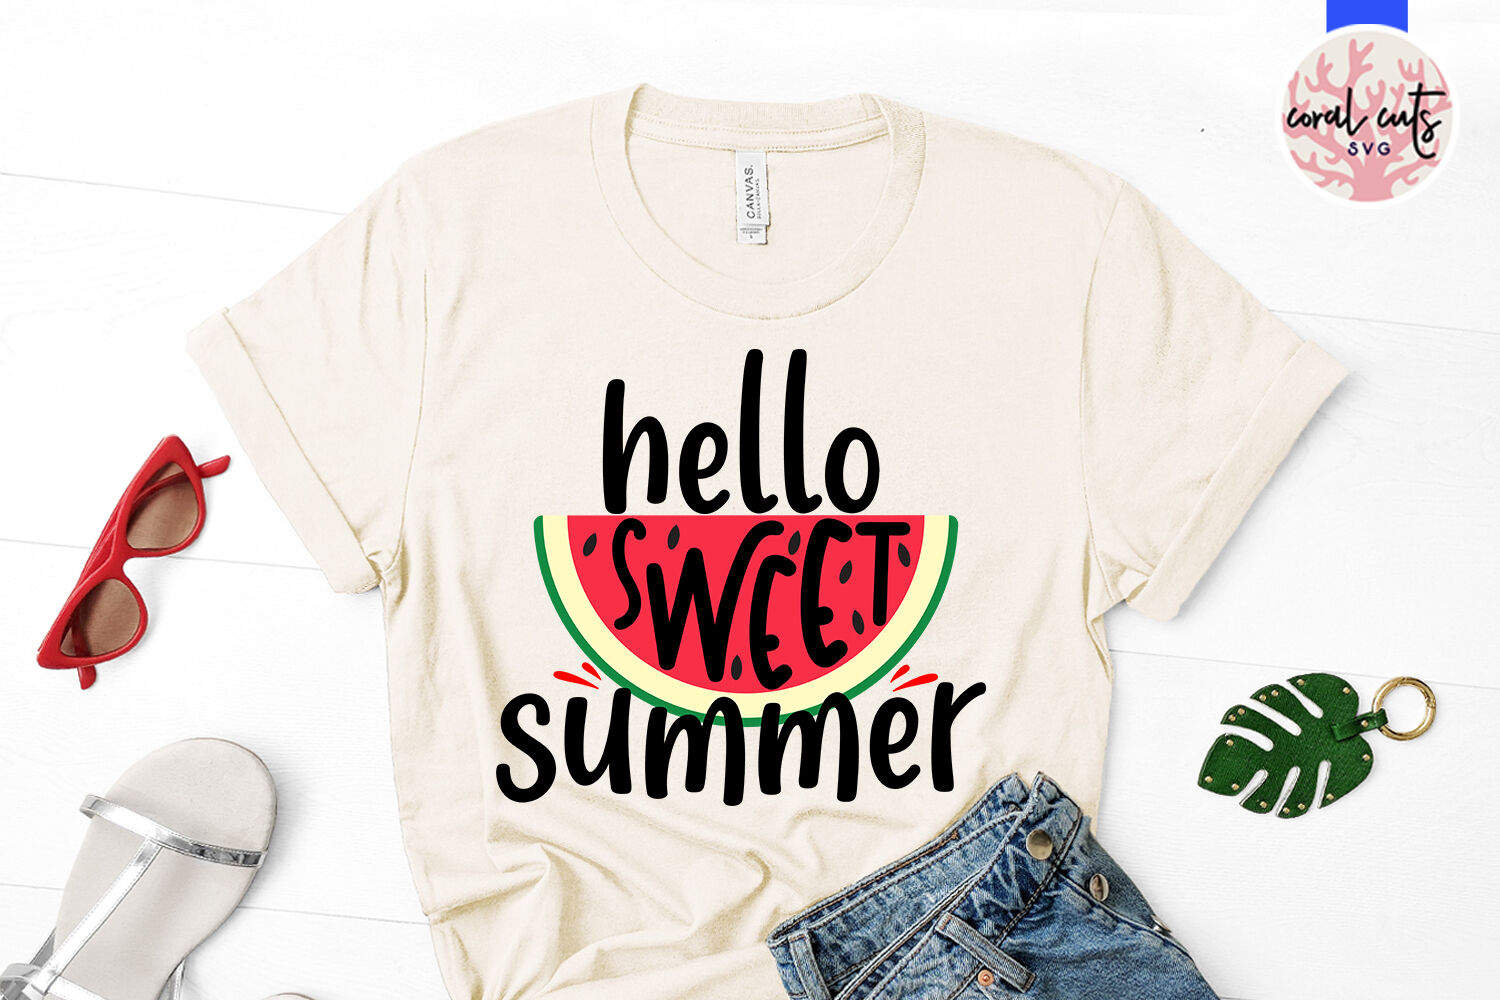 Hello sweet summer - Summer SVG EPS DXF PNG Cut File By ...